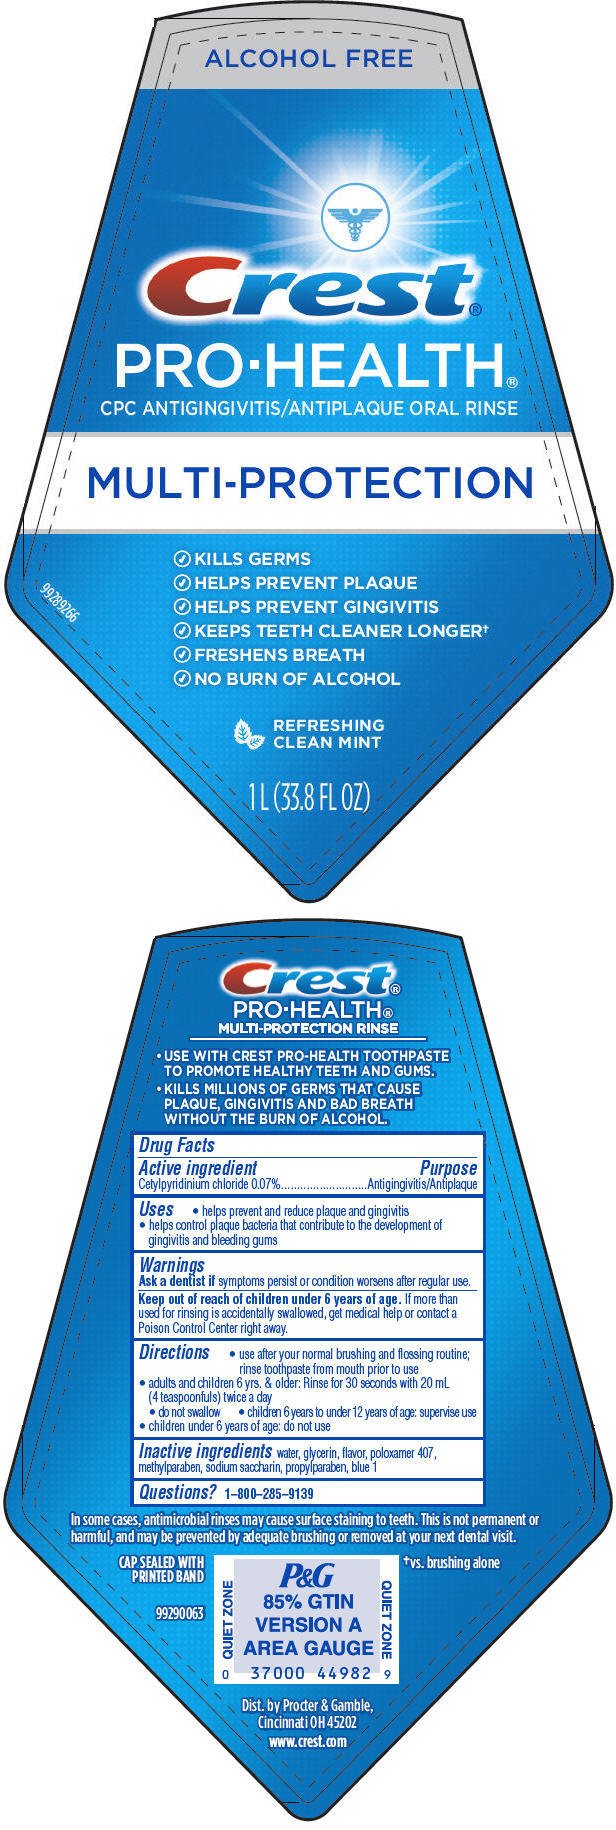 Amazoncom Crest Pro-health Advanced Mouthwash With Extra Tartar Protection Refreshing Mint 1690 Oz Pack Of 2 Beauty Personal Care